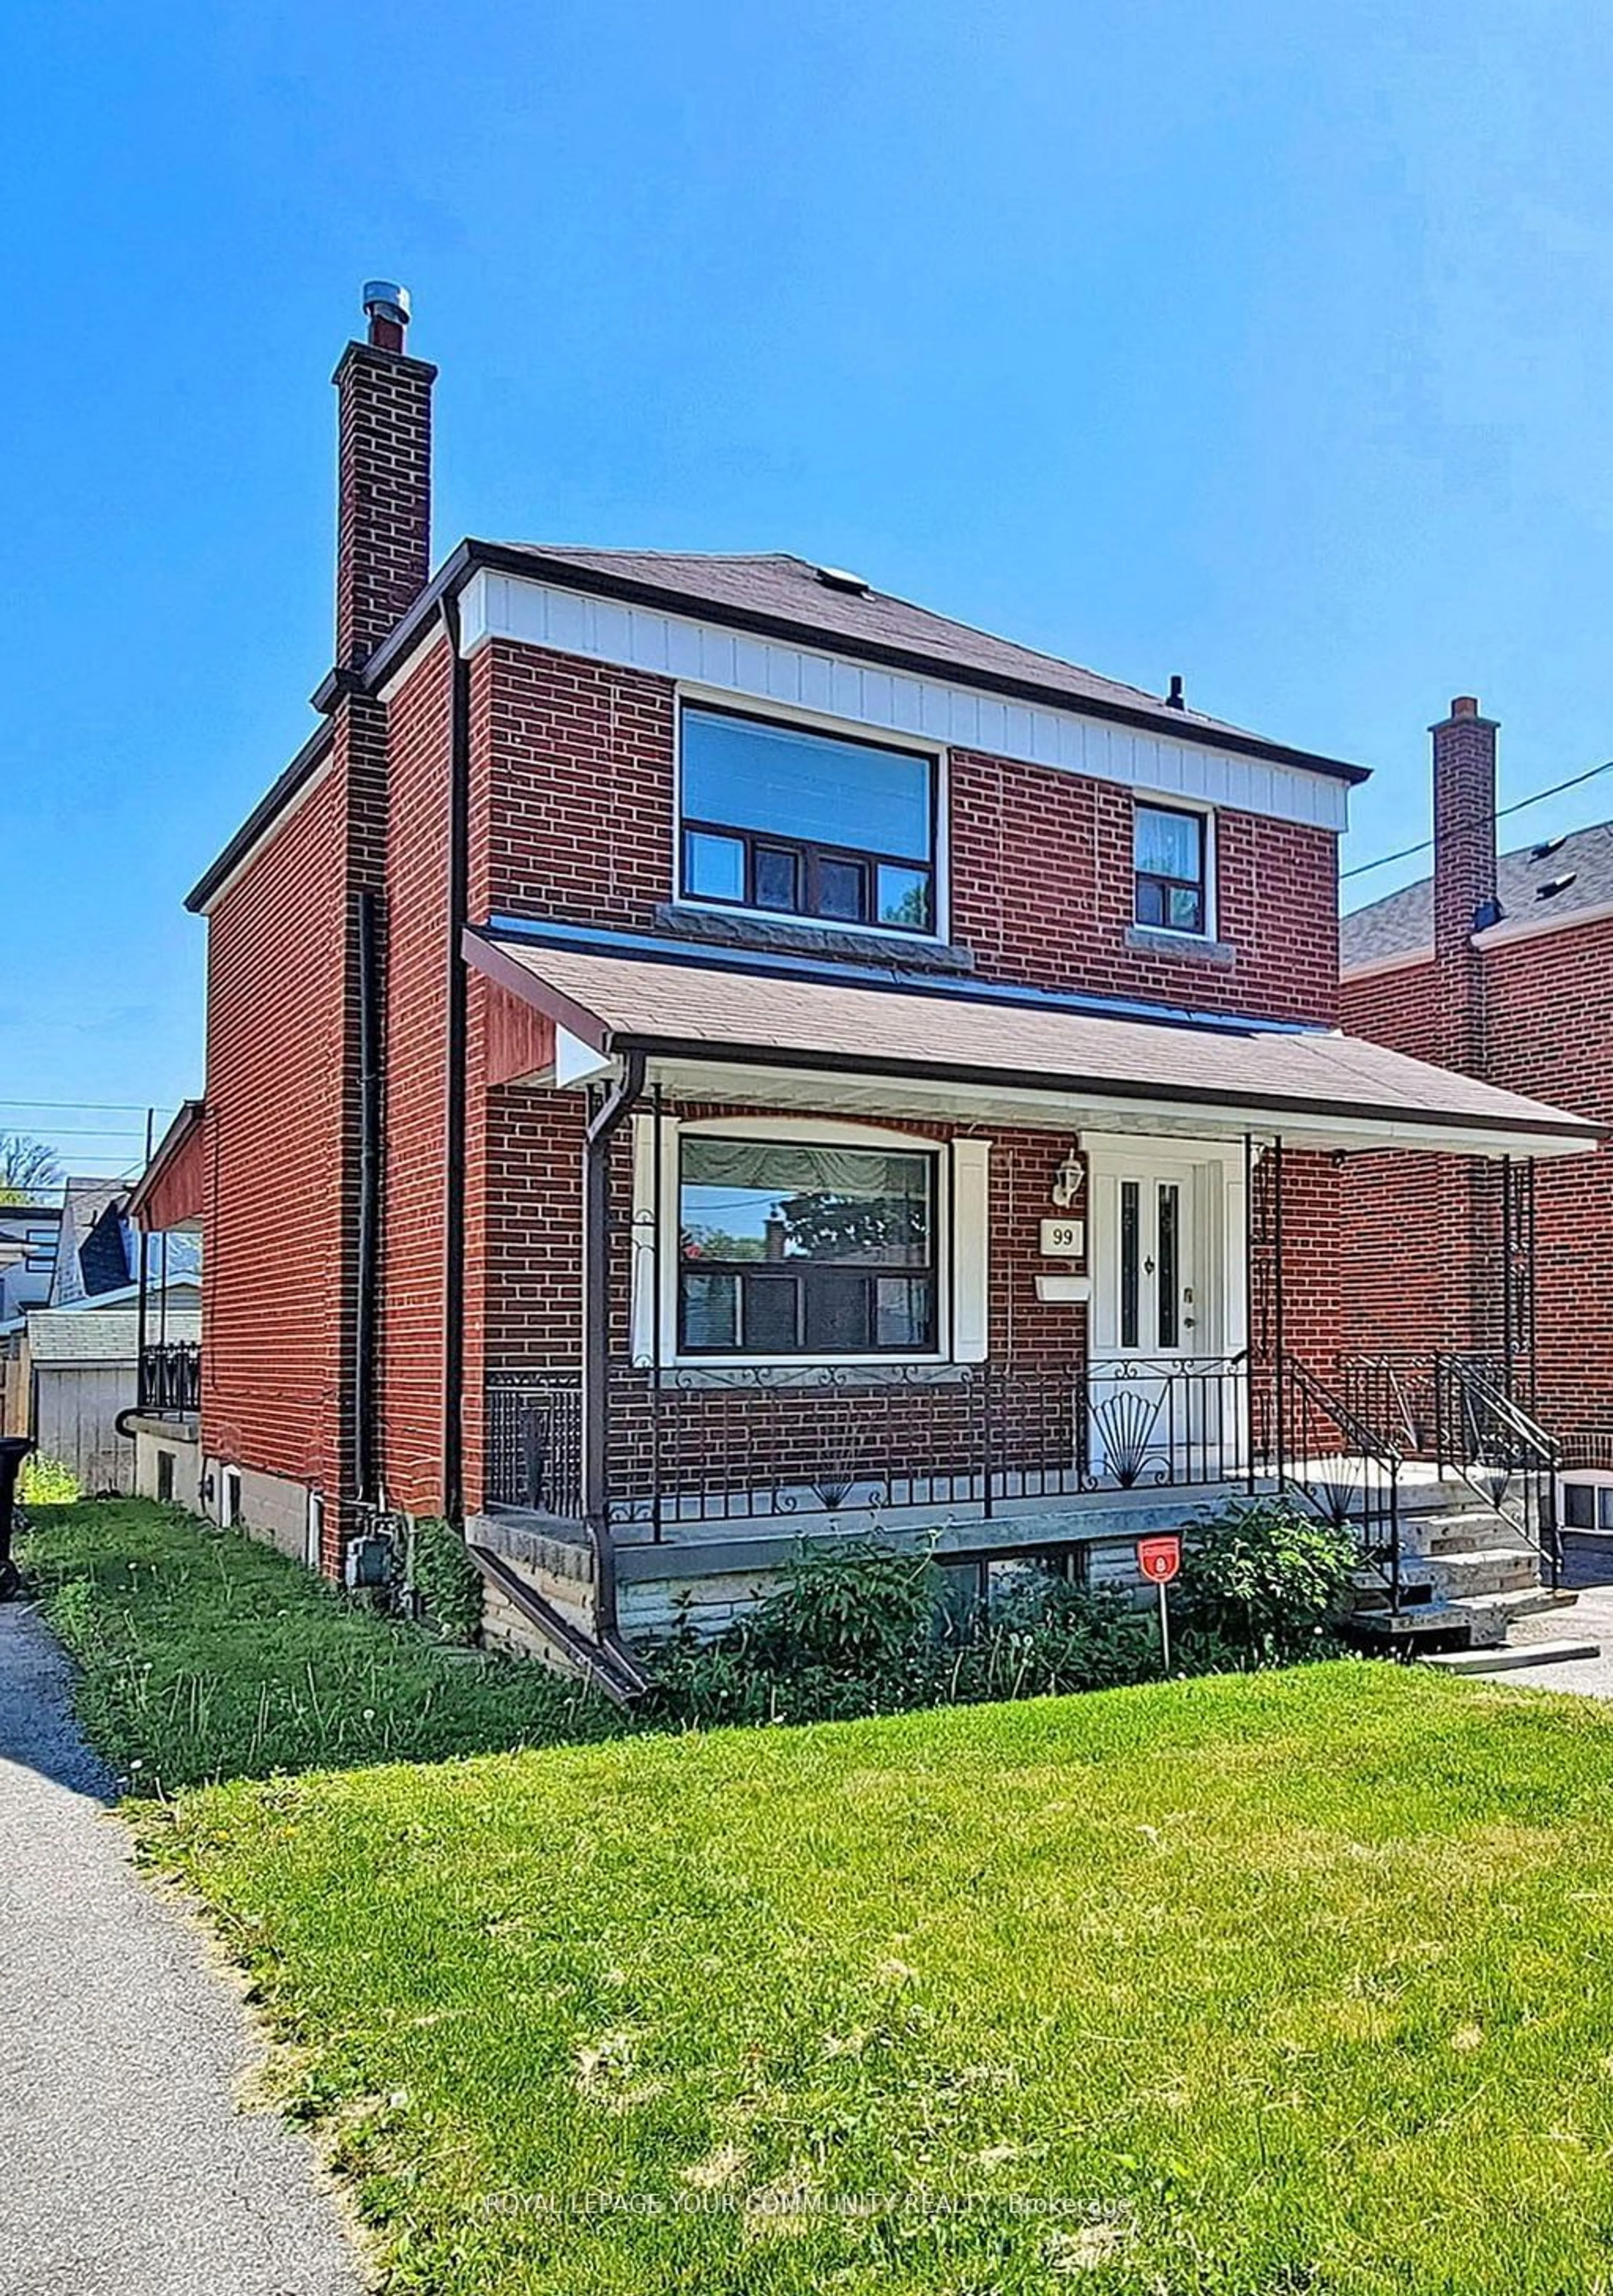 Home with unknown exterior material for 99 Galbraith Ave, Toronto Ontario M4B 2B8